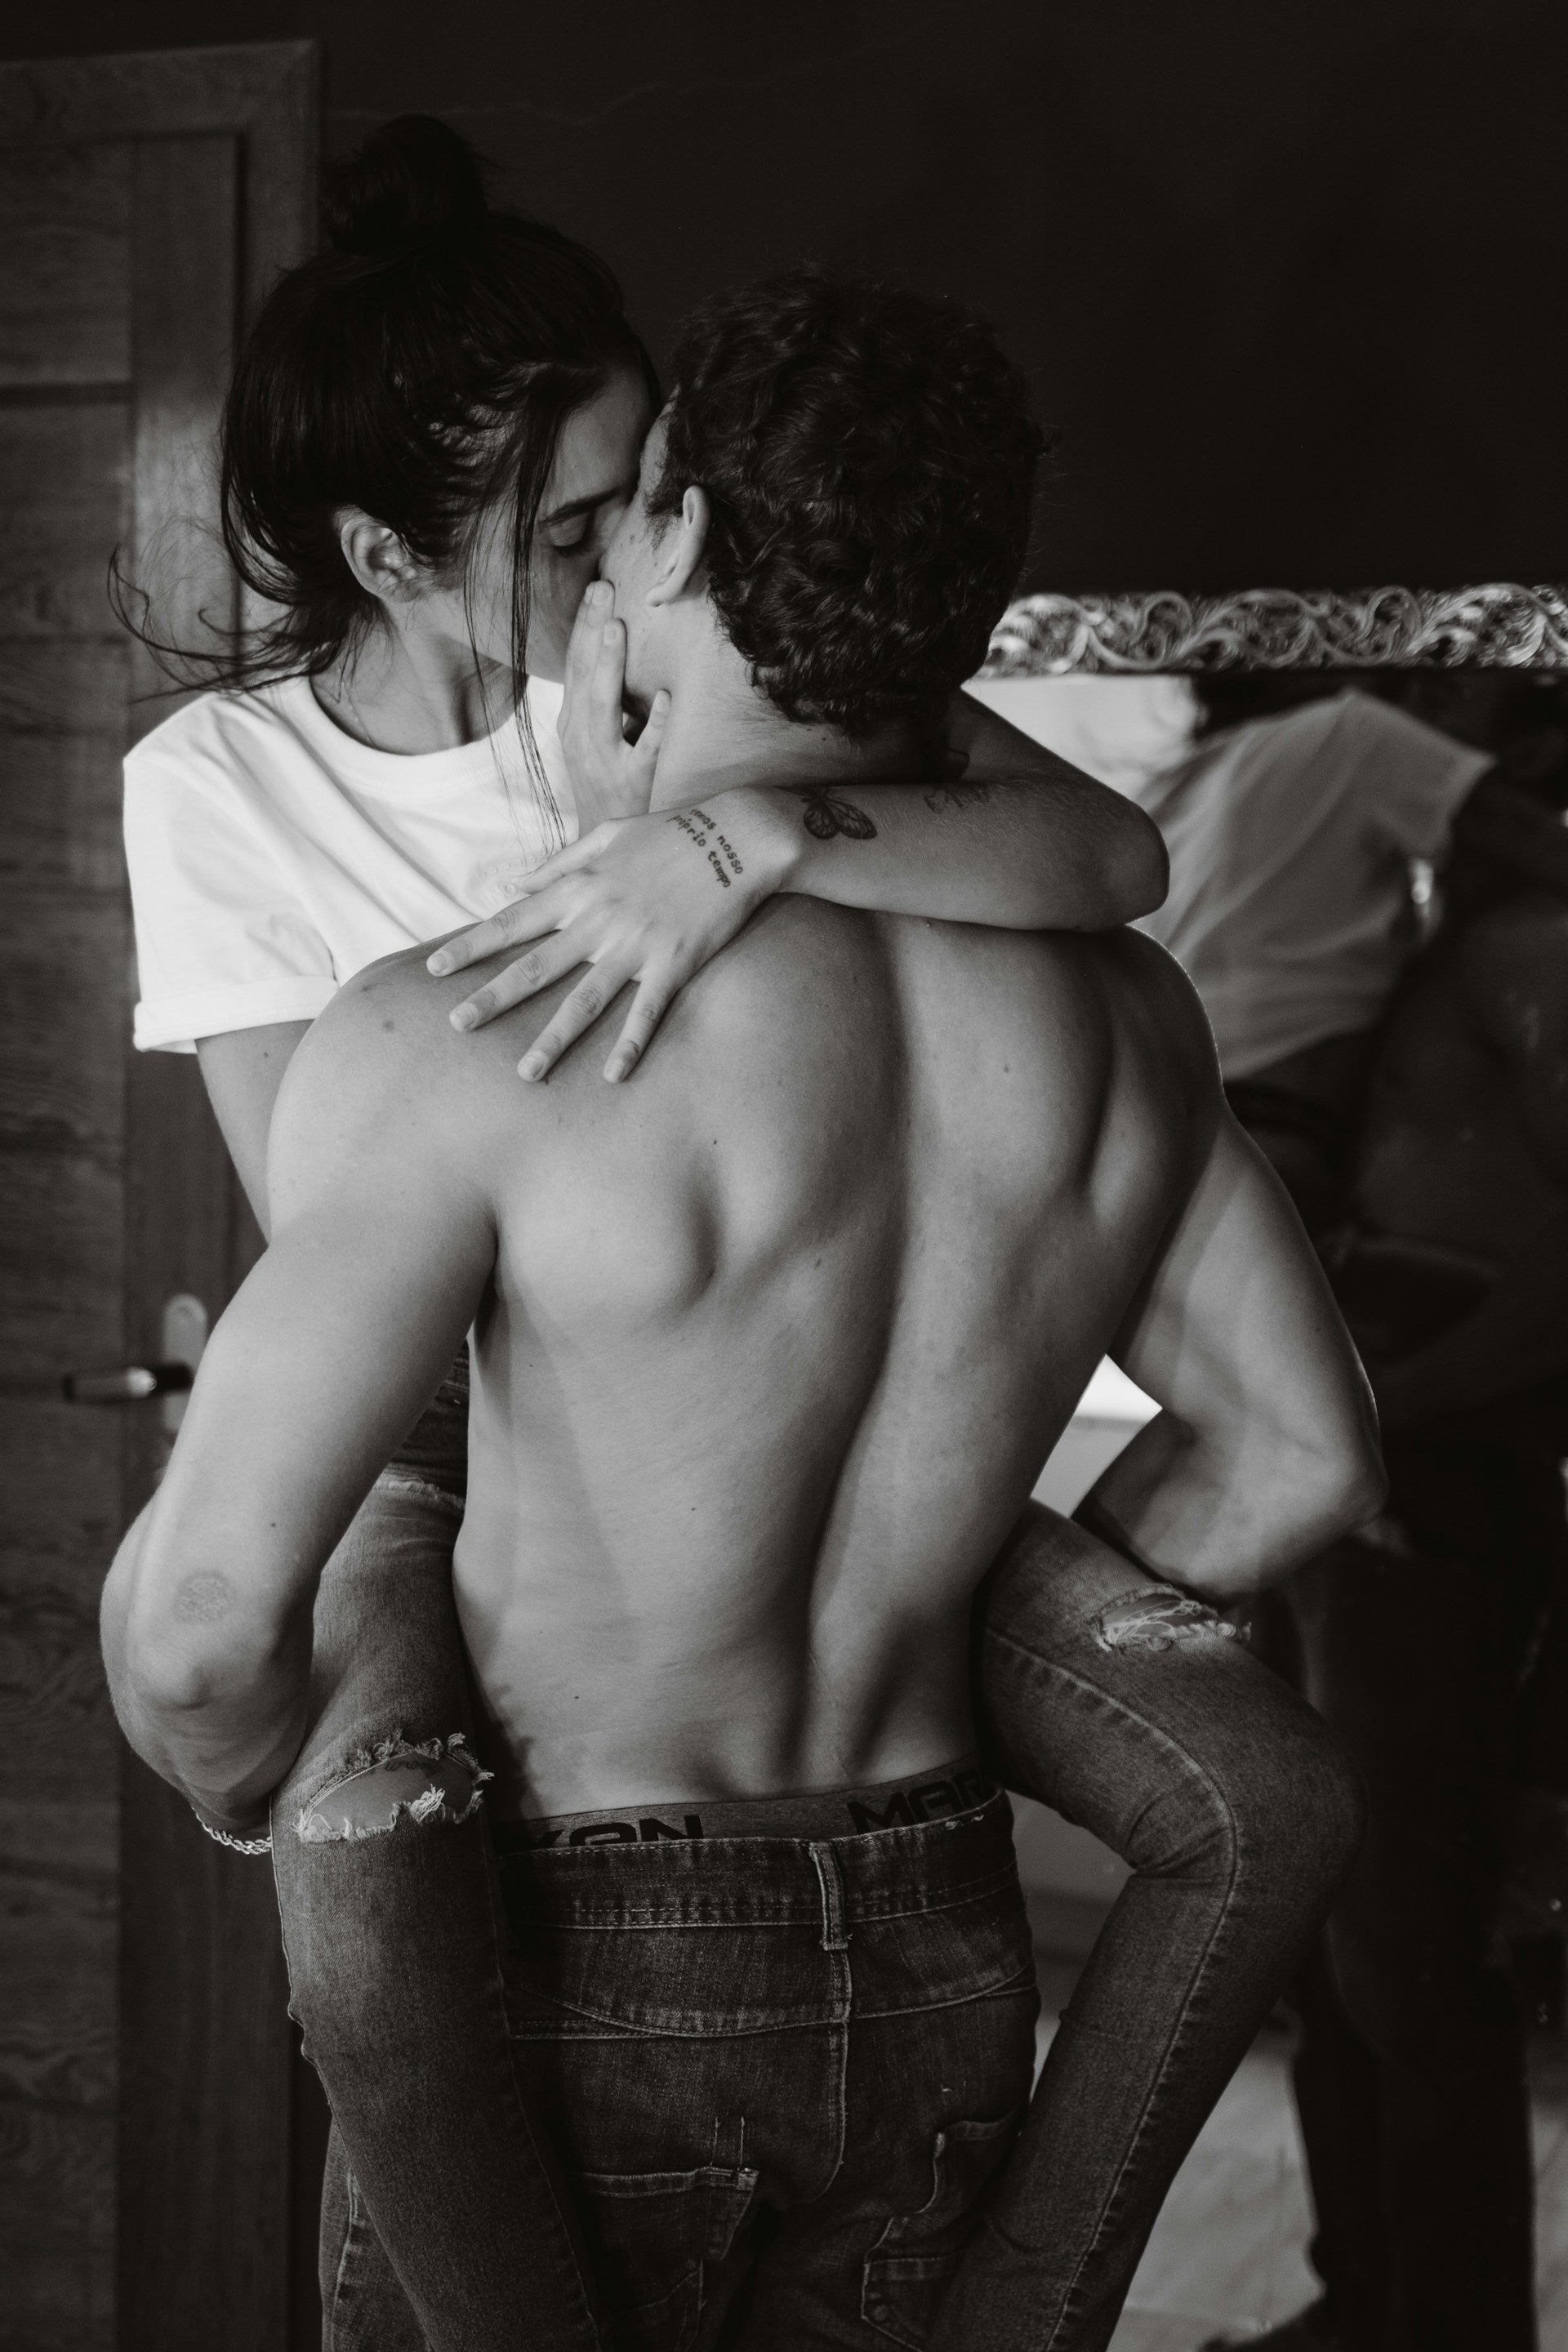 A young couple embracing each other while the man is shirtless wearing jeans and the girl has her hair in a messy bun